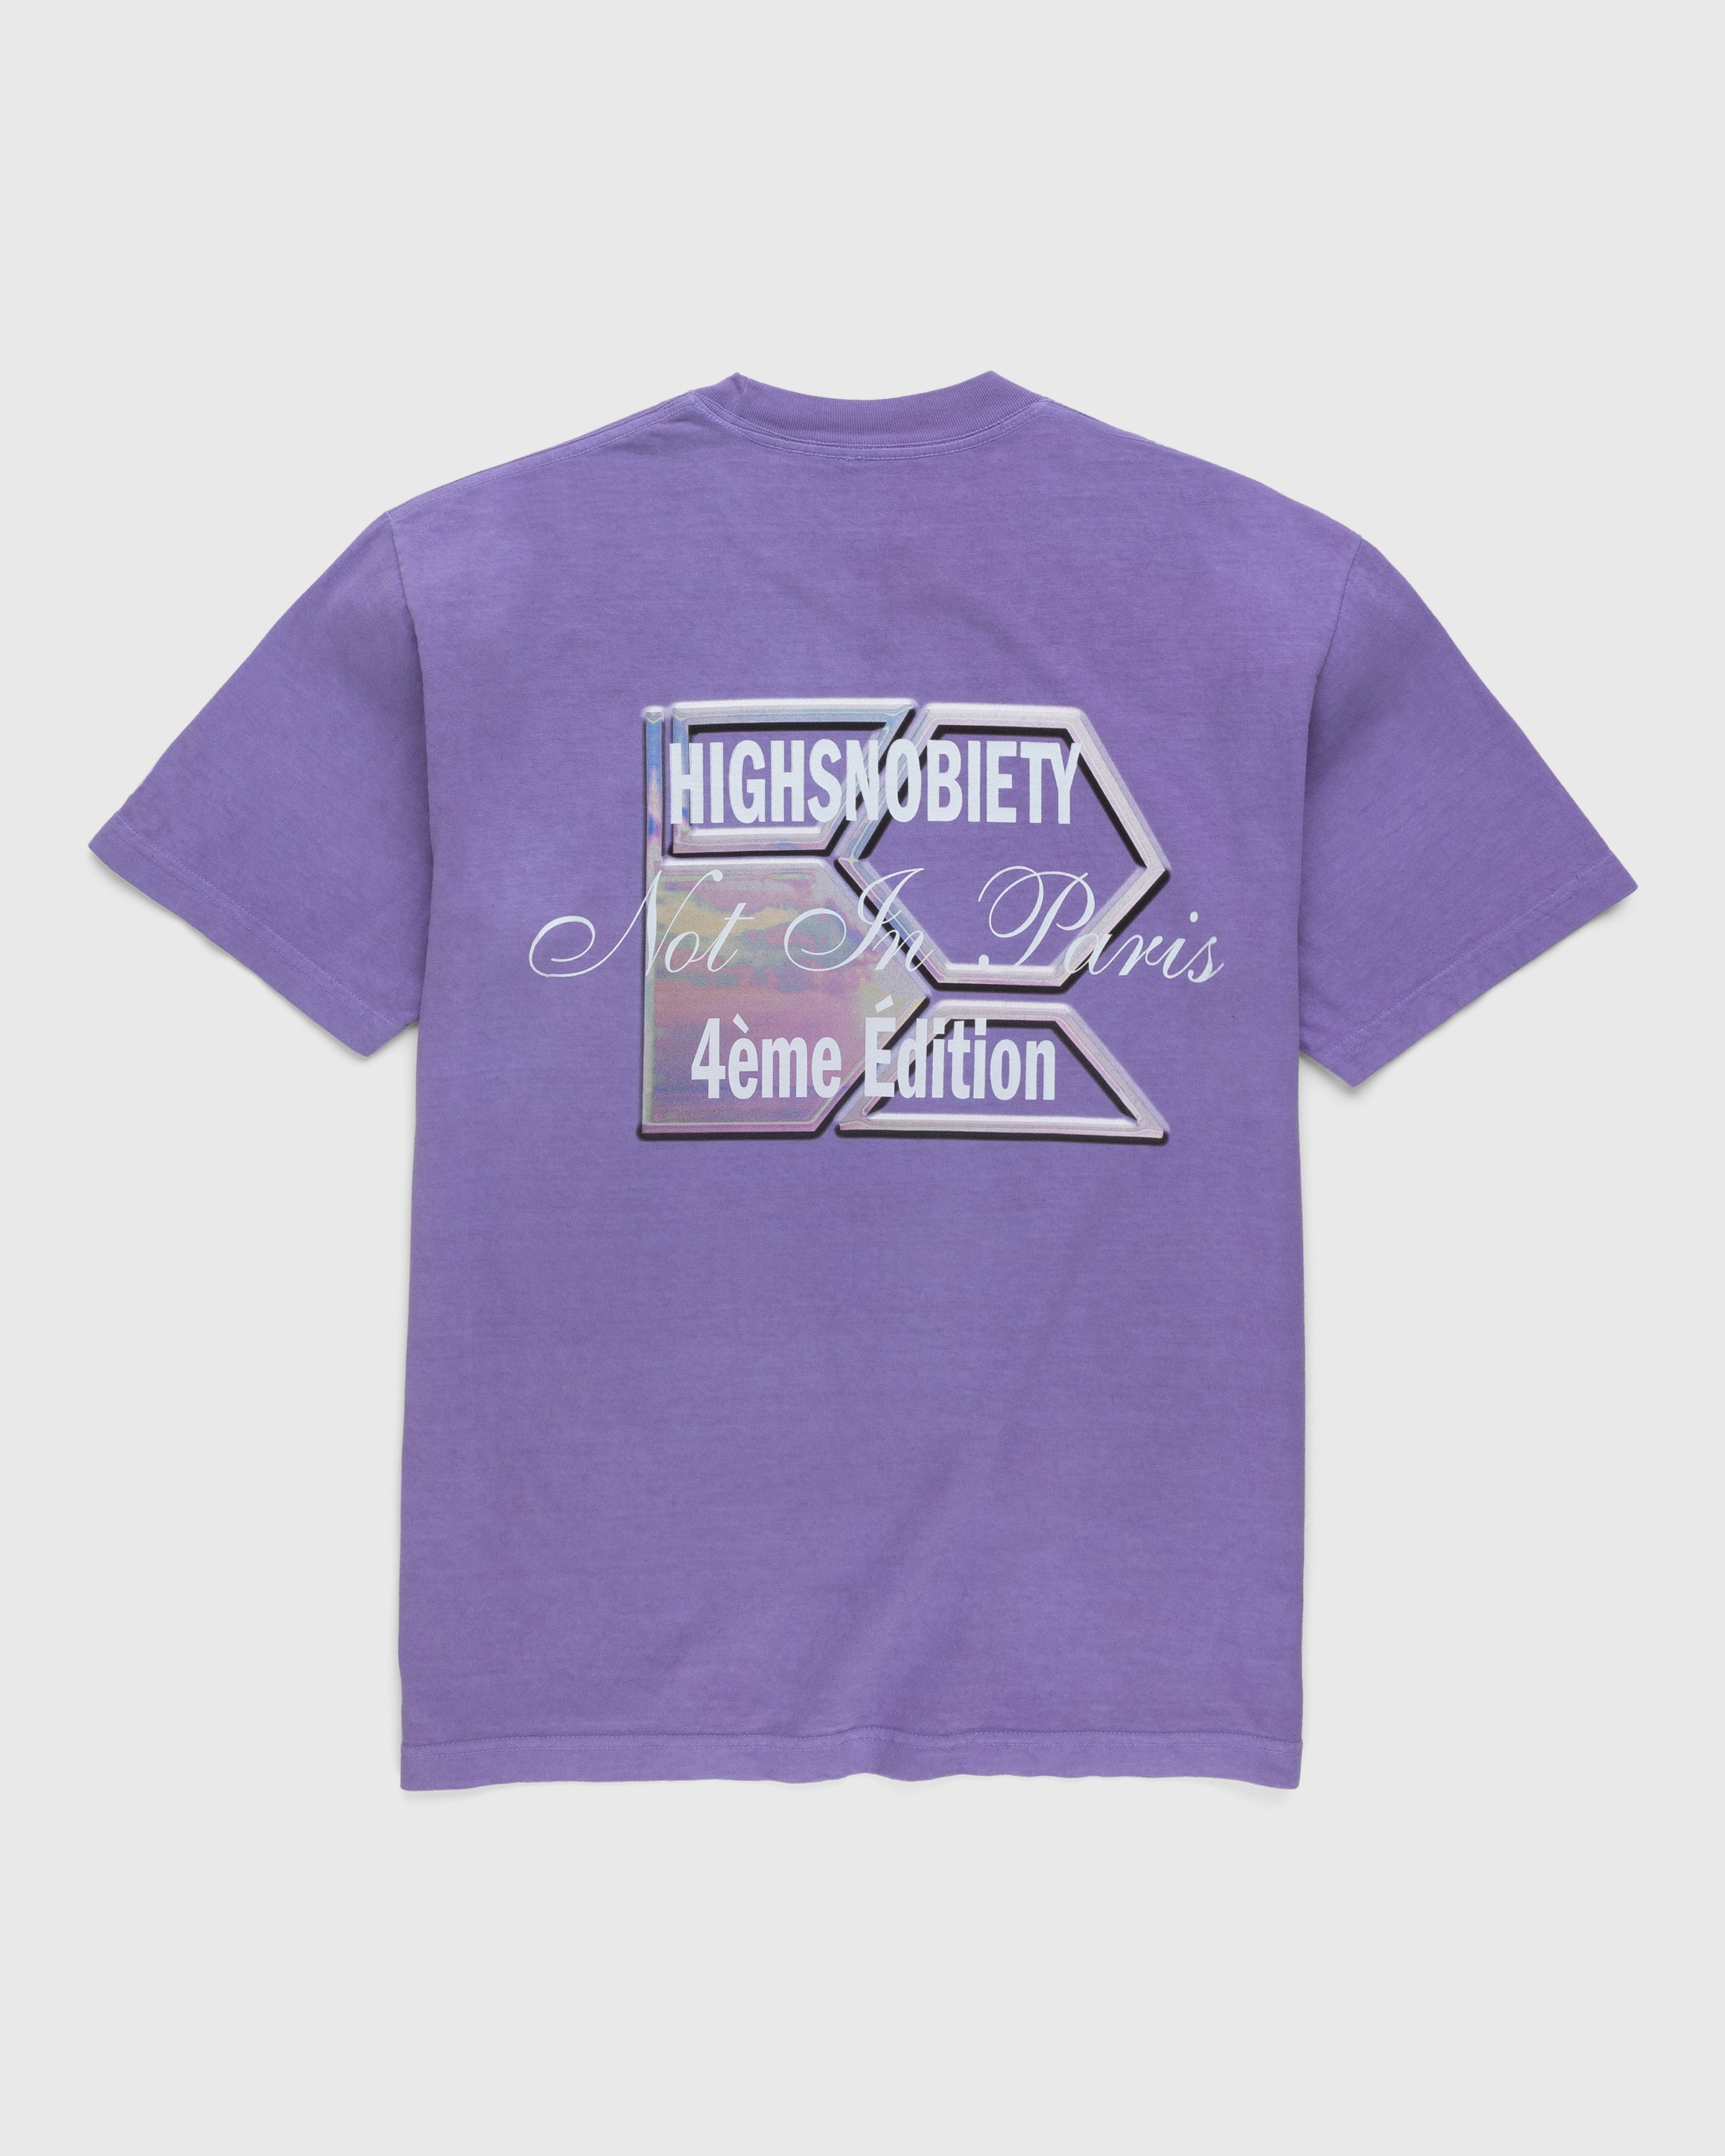 Bstroy x Highsnobiety - Not In Paris 4 Flower T-Shirt Lavender - Clothing - Purple - Image 2